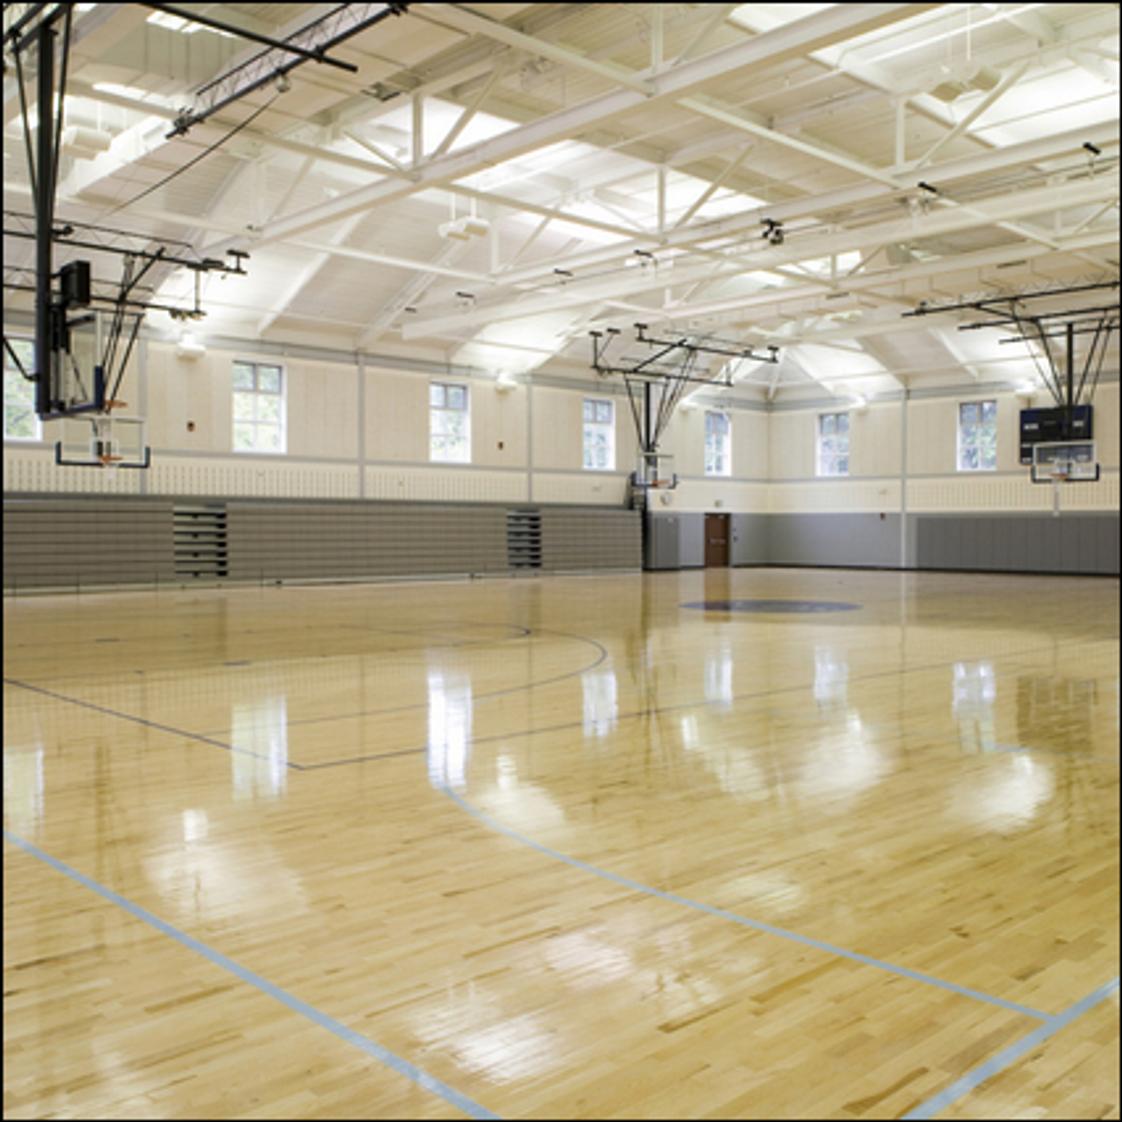 Beaver Country Day School Photo - The Athletic Center opened in 2007. Added onto the existing gym, it more than doubled the amount of indoor space dedicated to sports. There are also new, separate locker rooms for middle and upper school athletes.